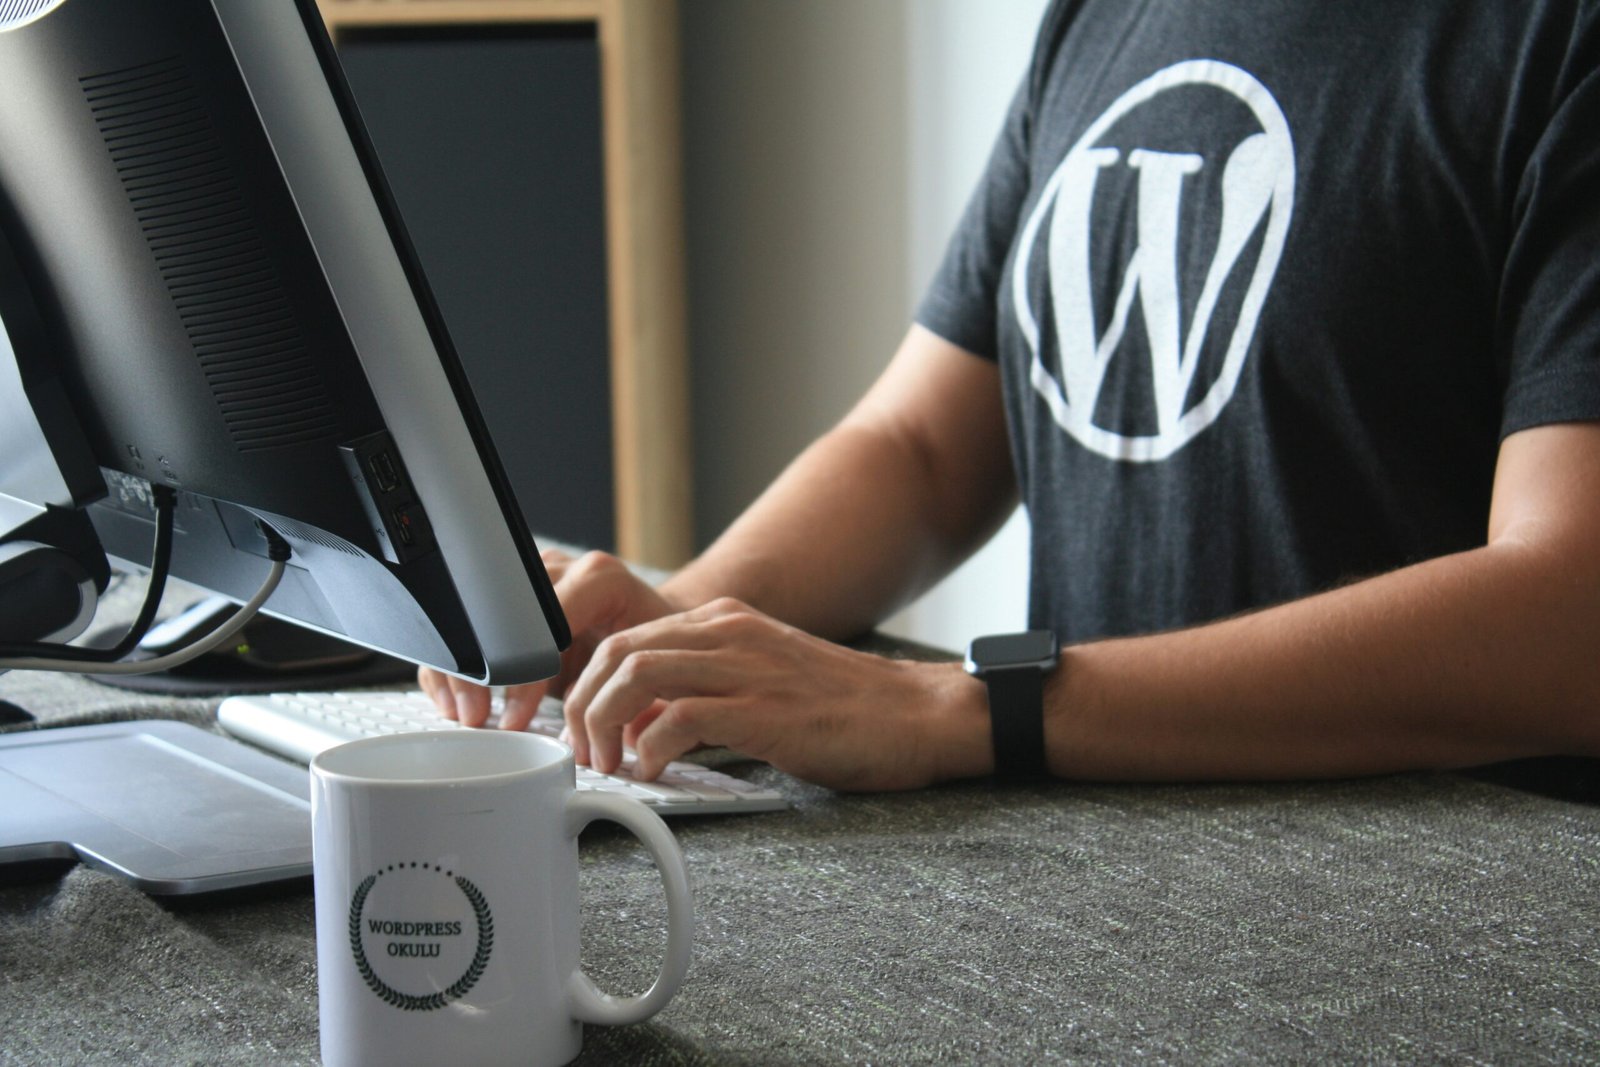 How to Create a Custom Post Type in WordPress: A Step-by-Step Guide